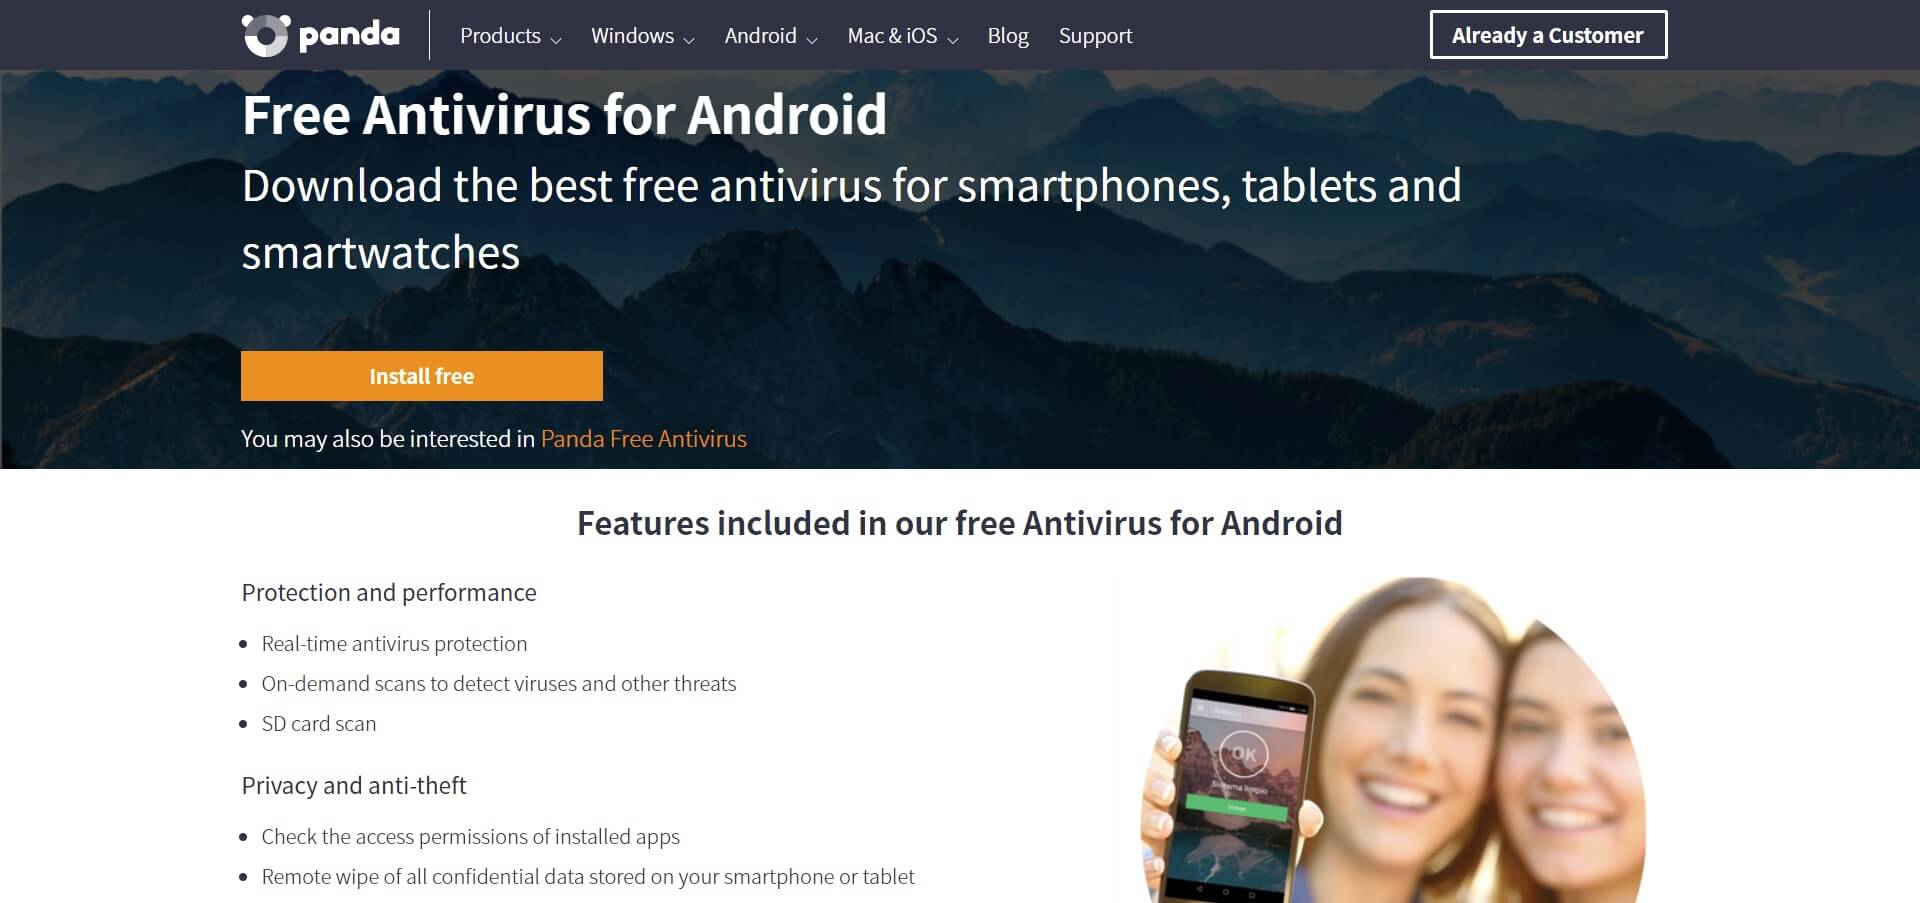 best antivirus apps for Android, best antivirus for Android, best anti-malware apps for Android, best anti-malware for Android, best free antivirus for Android, best antivirus for Android smartphones, best free antivirus for Android mobile, best antivirus app for Android, best free antivirus for Android phone, best antivirus for Android phone, best free antivirus app for Android, best antivirus software for Android, best free antivirus for Android tablet